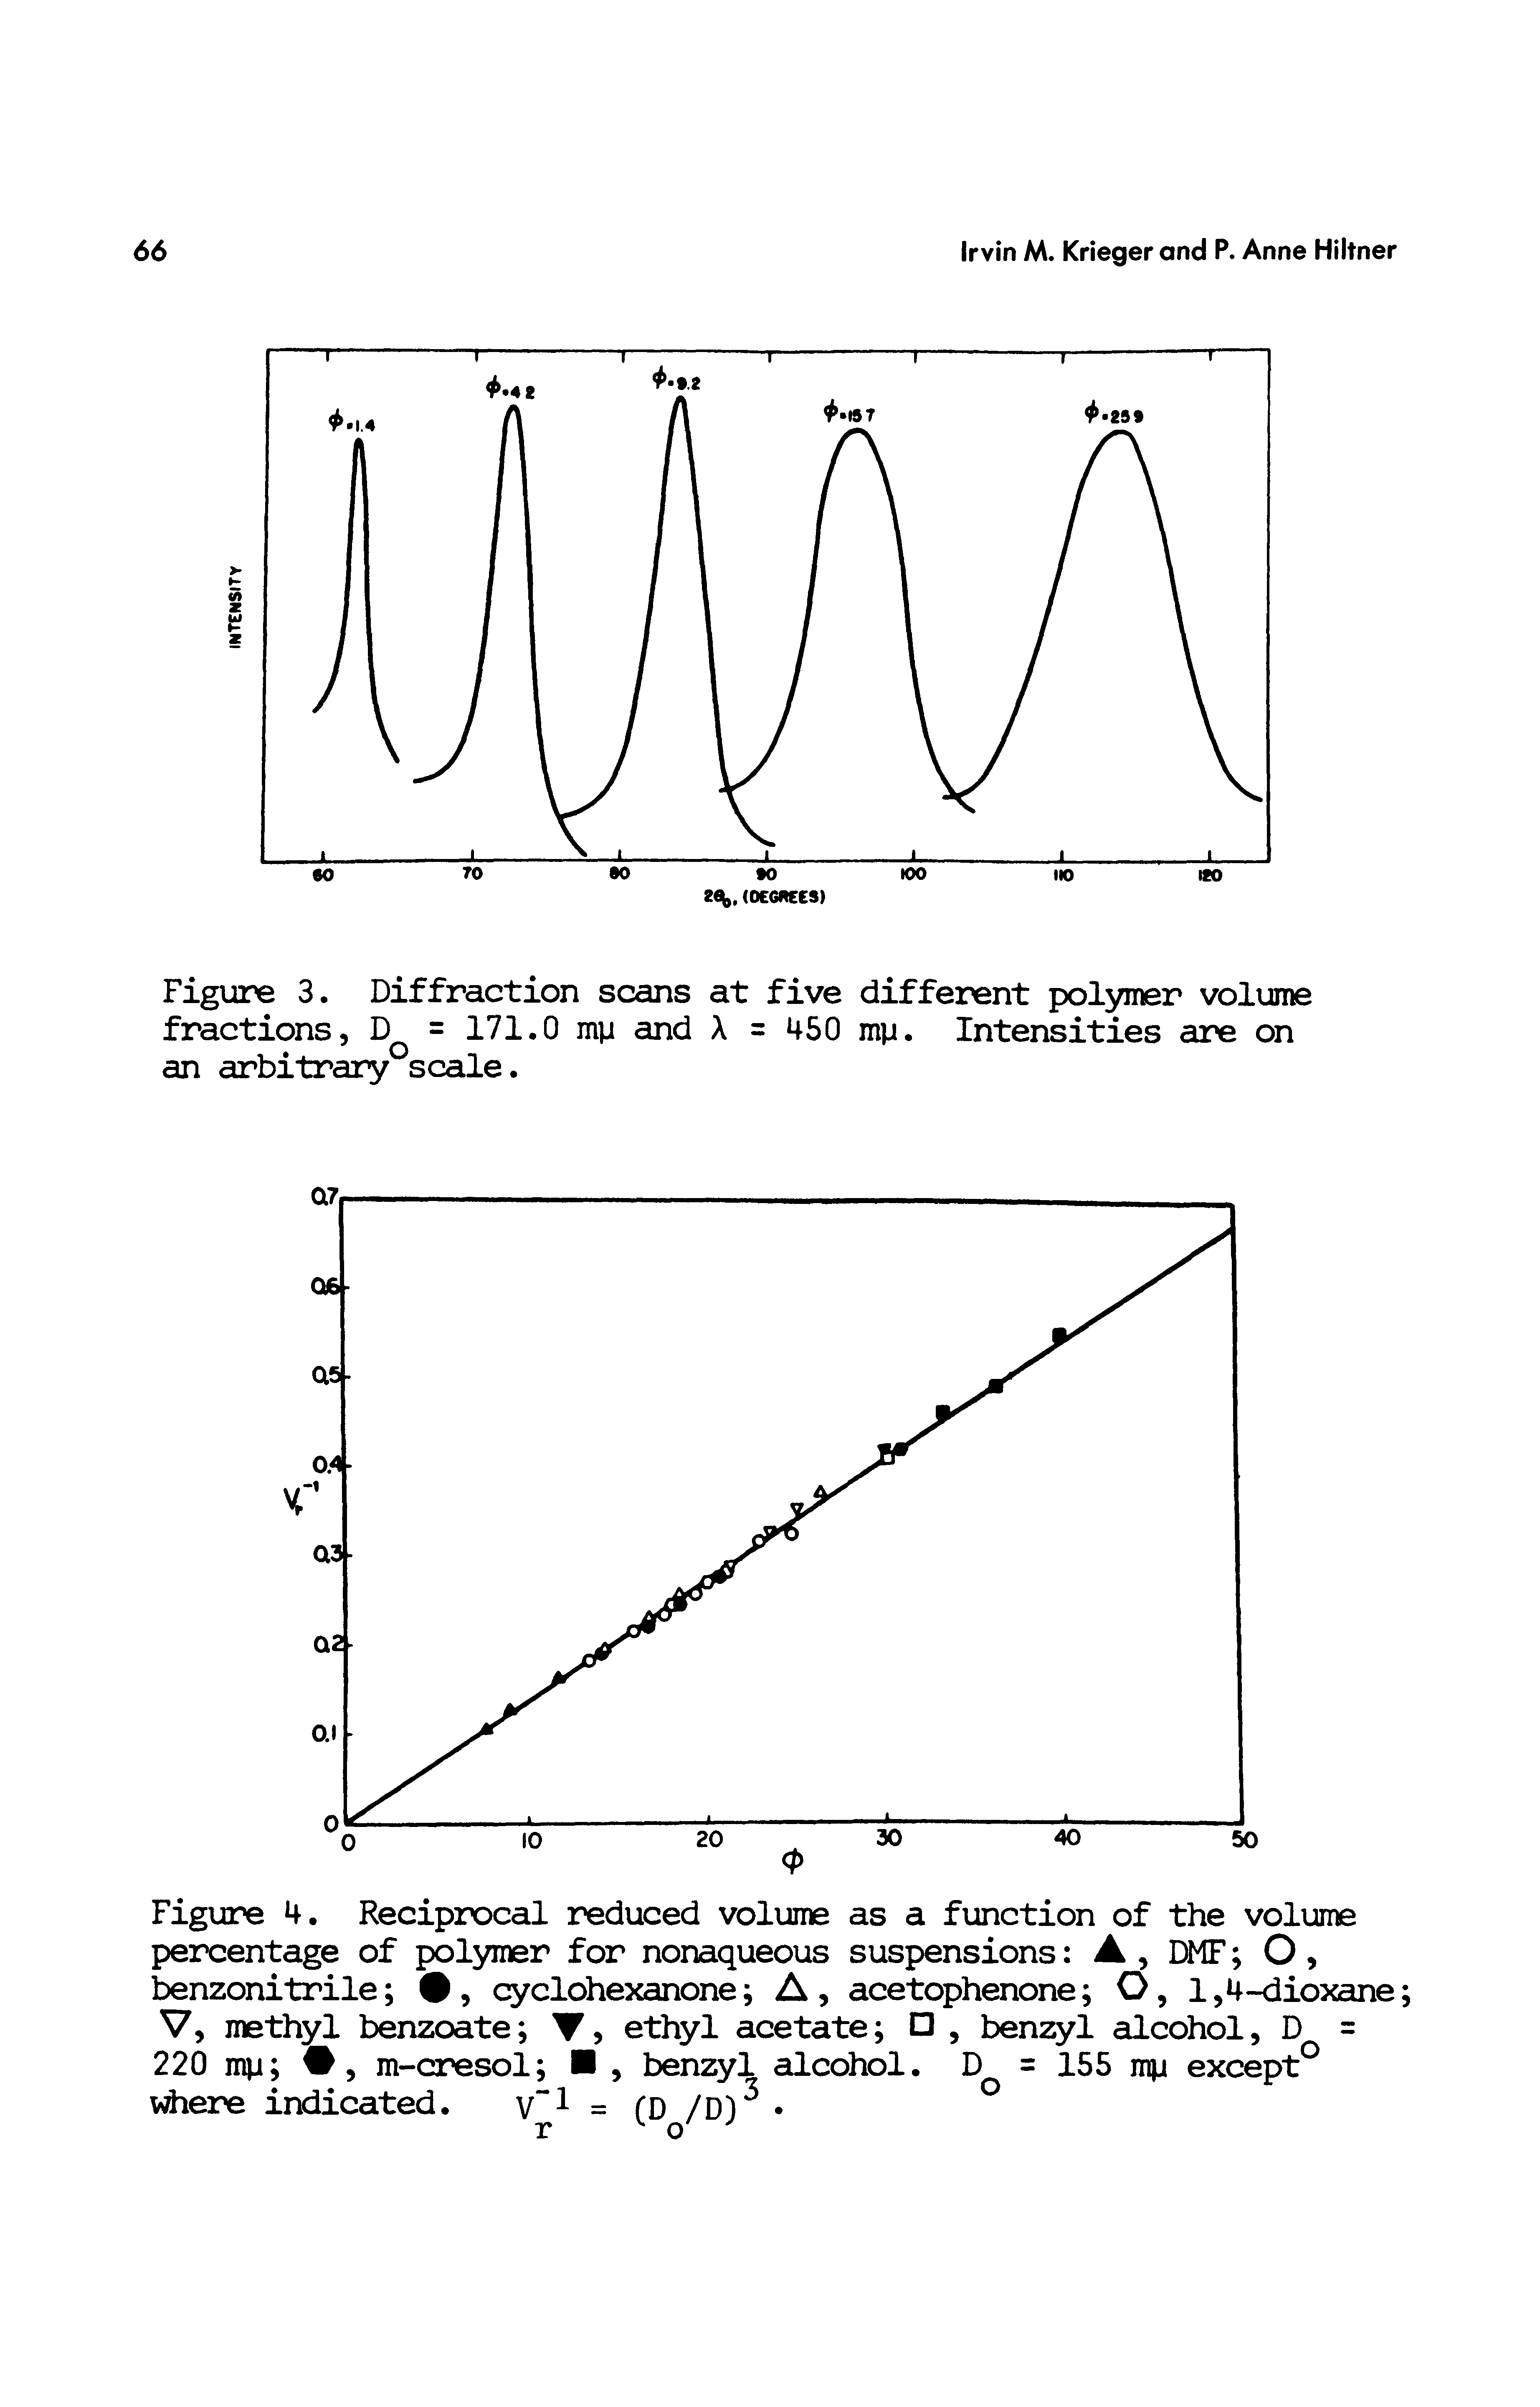 Figure 4. Reciprocal reduced volume as a function of the volume percentage of polymer for nonaqueous suspensions A, DMF O, benzonitrile , cyclohexanone A, acetophenone O, 1,4-dioxane V, methyl benzoate , ethyl acetate O, benzyl alcohol, D =...